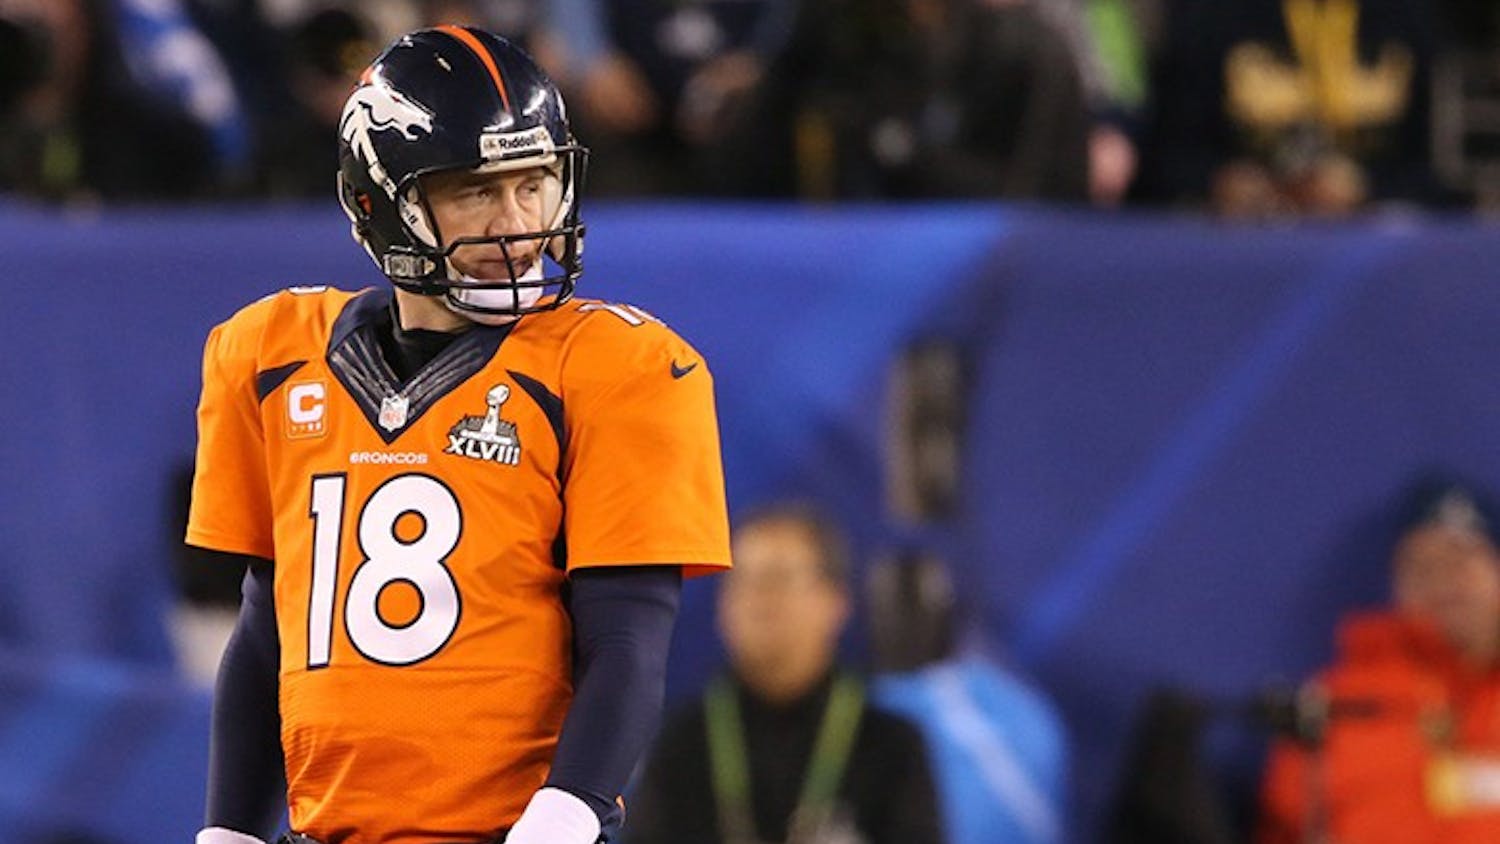 Peyton Manning (18) of the Denver Broncos reacts after a play during the second half of Super Bowl XLVIII against the Seattle Seahawks at MetLife Stadium in East Rutherford, N.J., on Sunday, Feb. 2, 2014. (Lionel Hahn/Abaca Press/MCT)